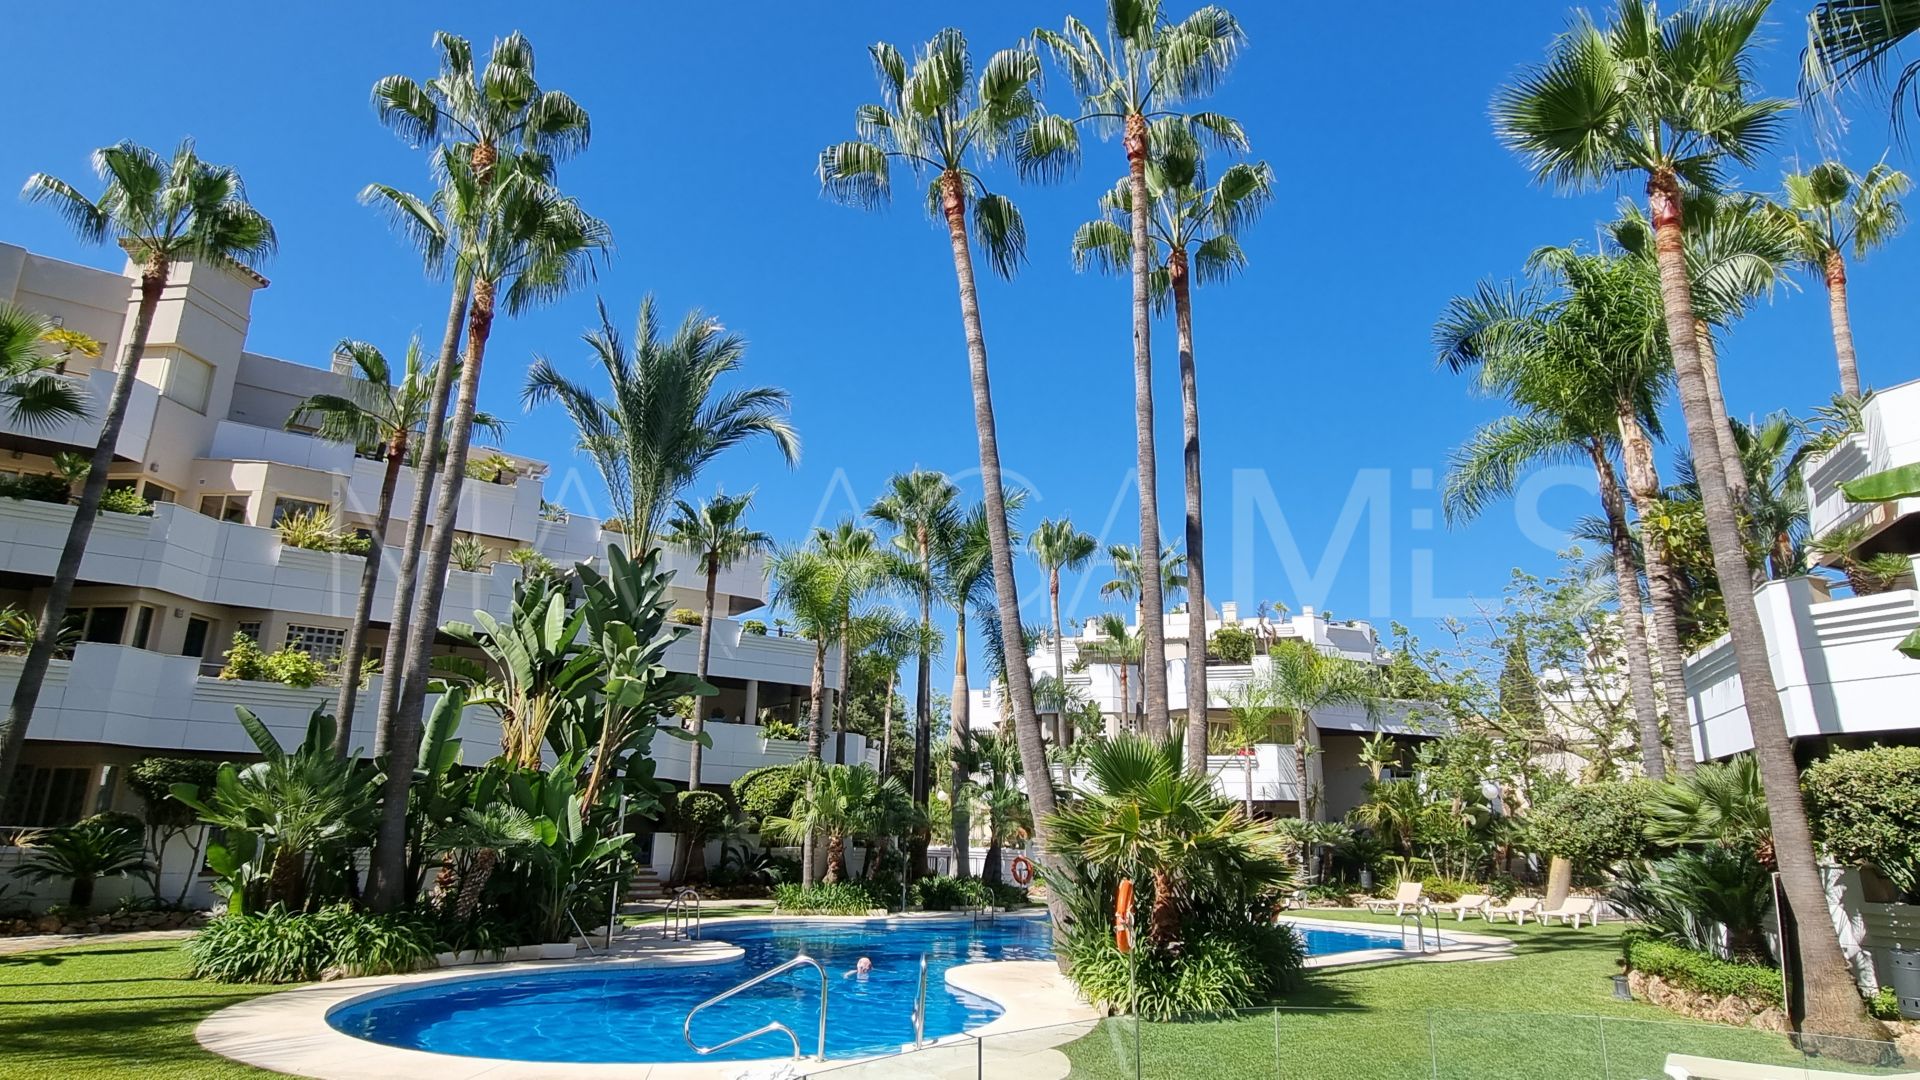 Atico with 3 bedrooms for sale in Fuente Aloha